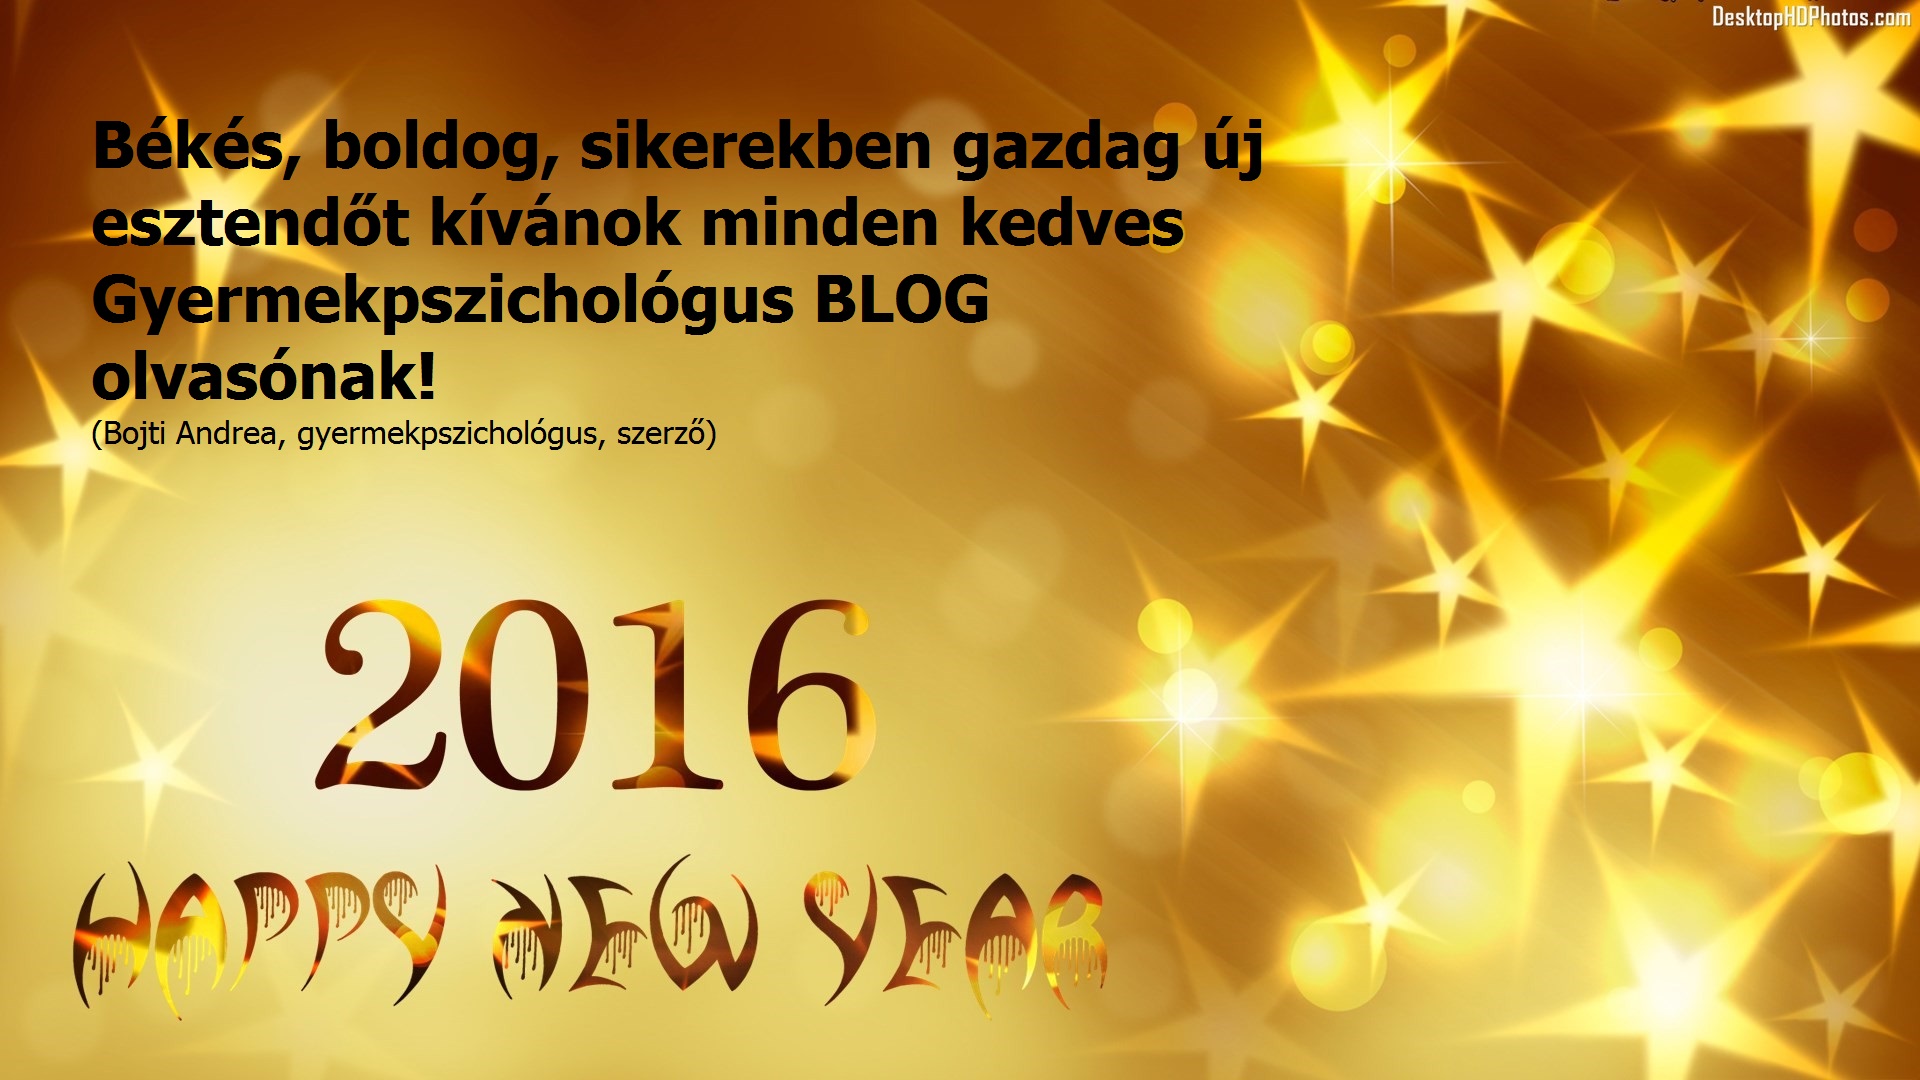 happy-new-year-2016-images-4.jpg